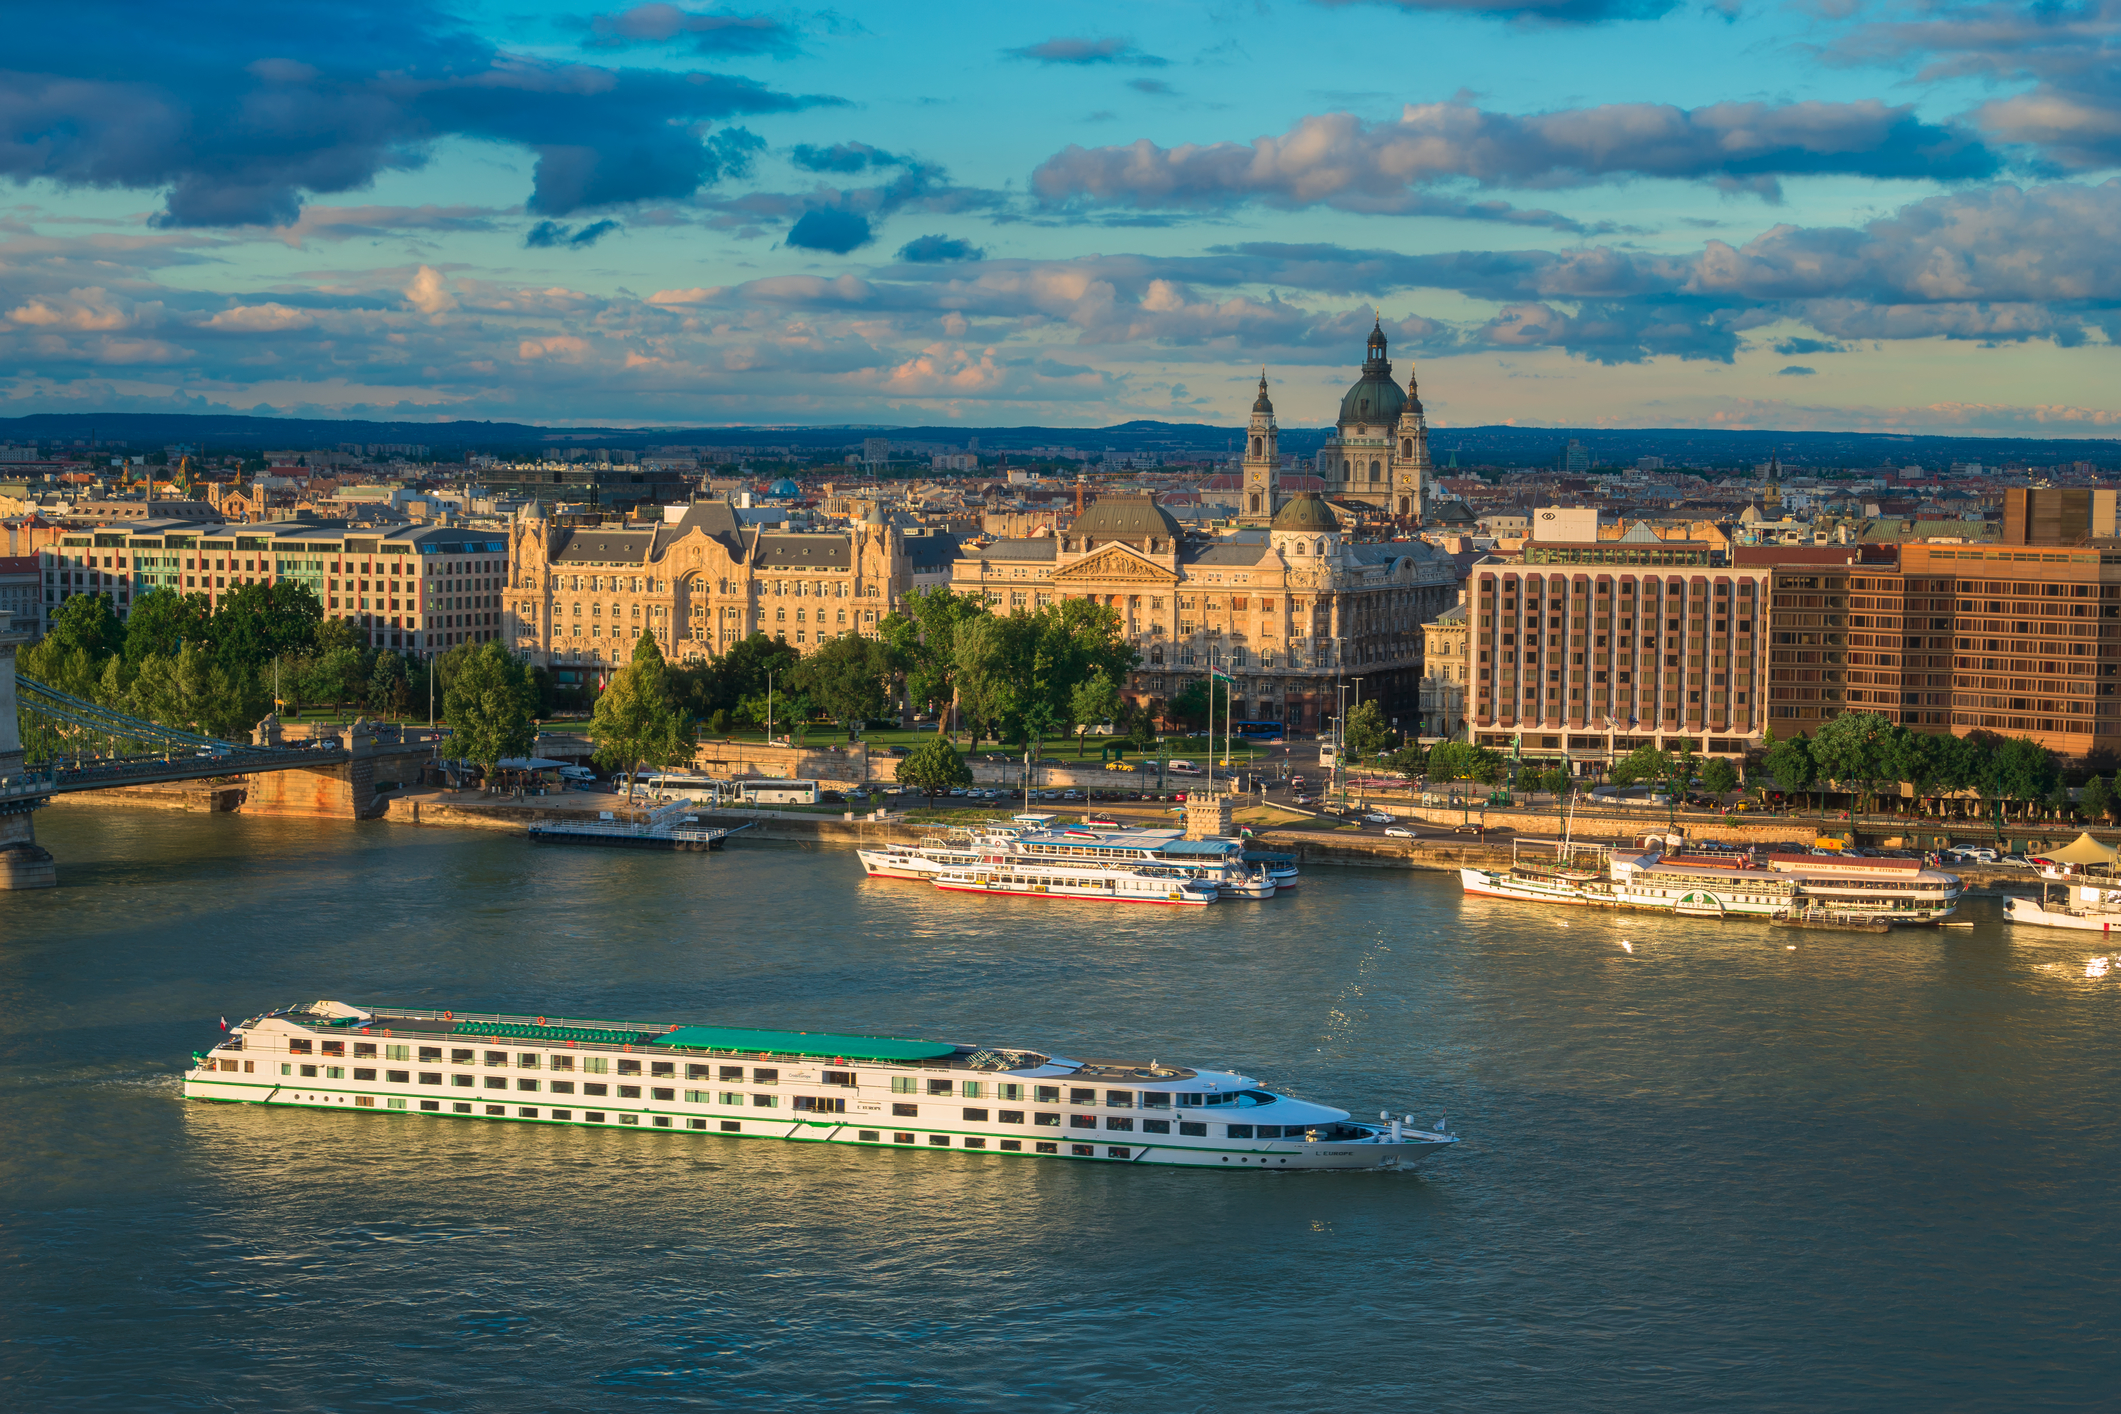 7-night Danube river cruise from $999